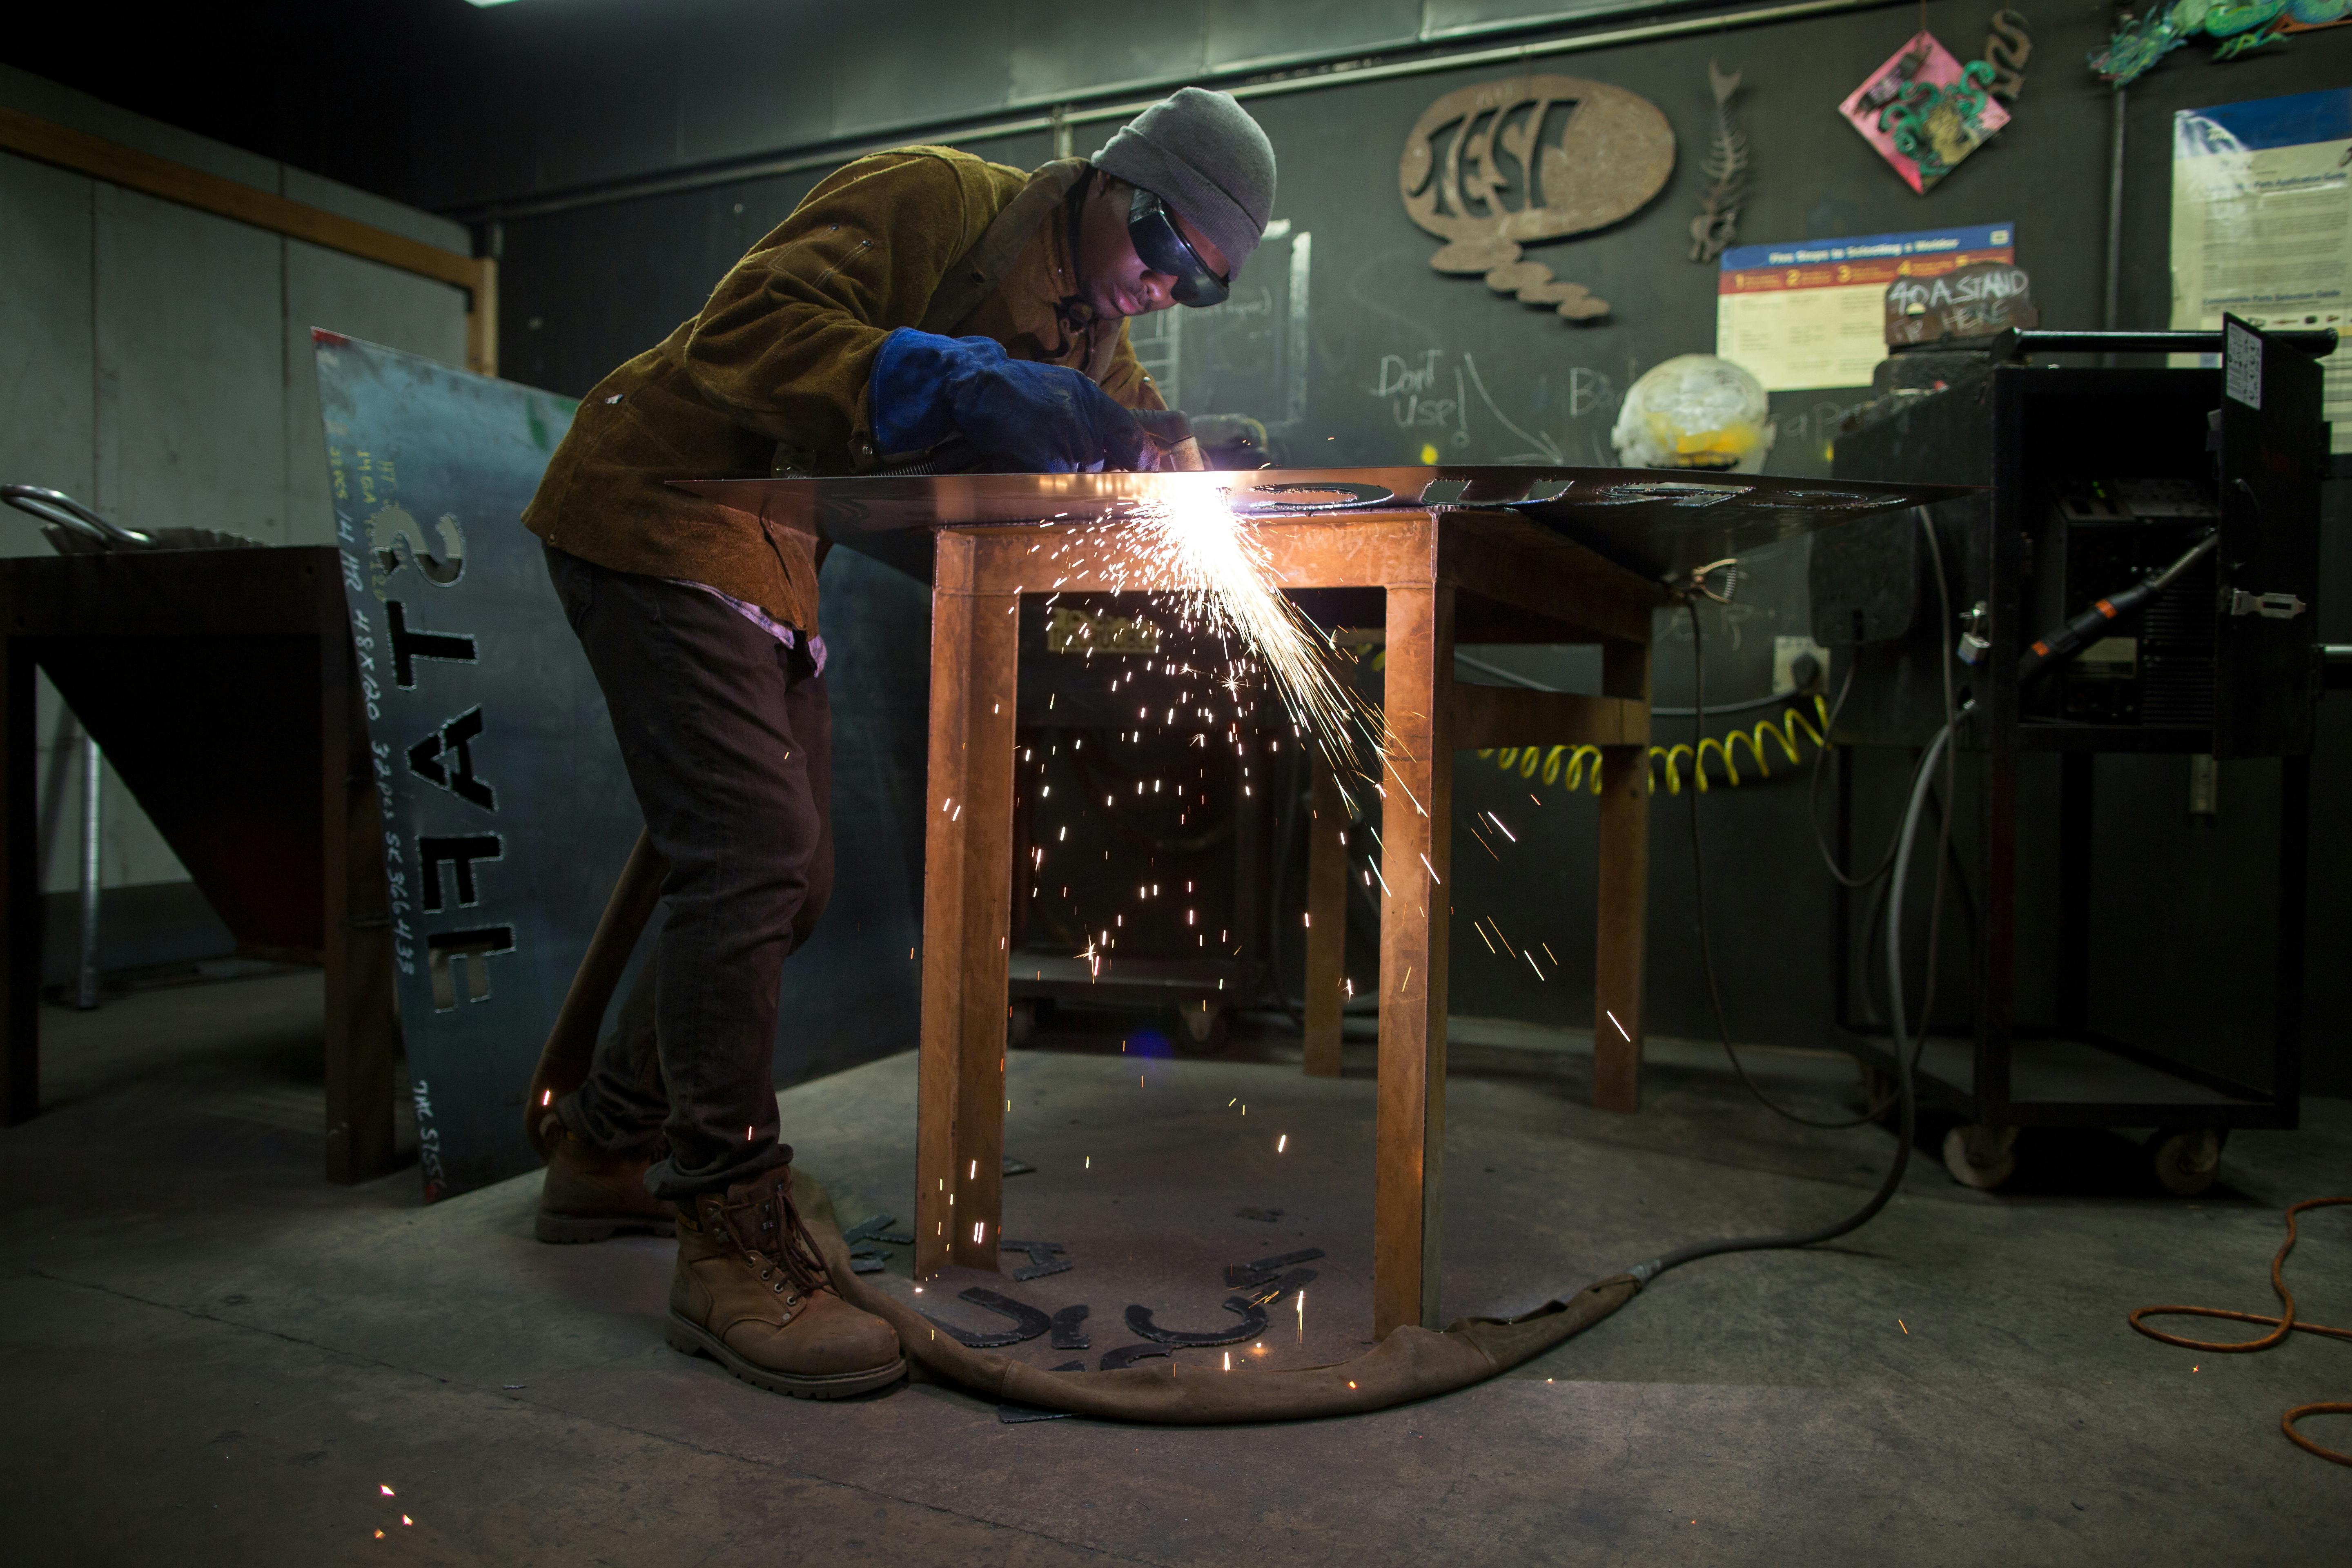 Vancouver arts hub could provide artists access to specialized equipment (Metal Arts)